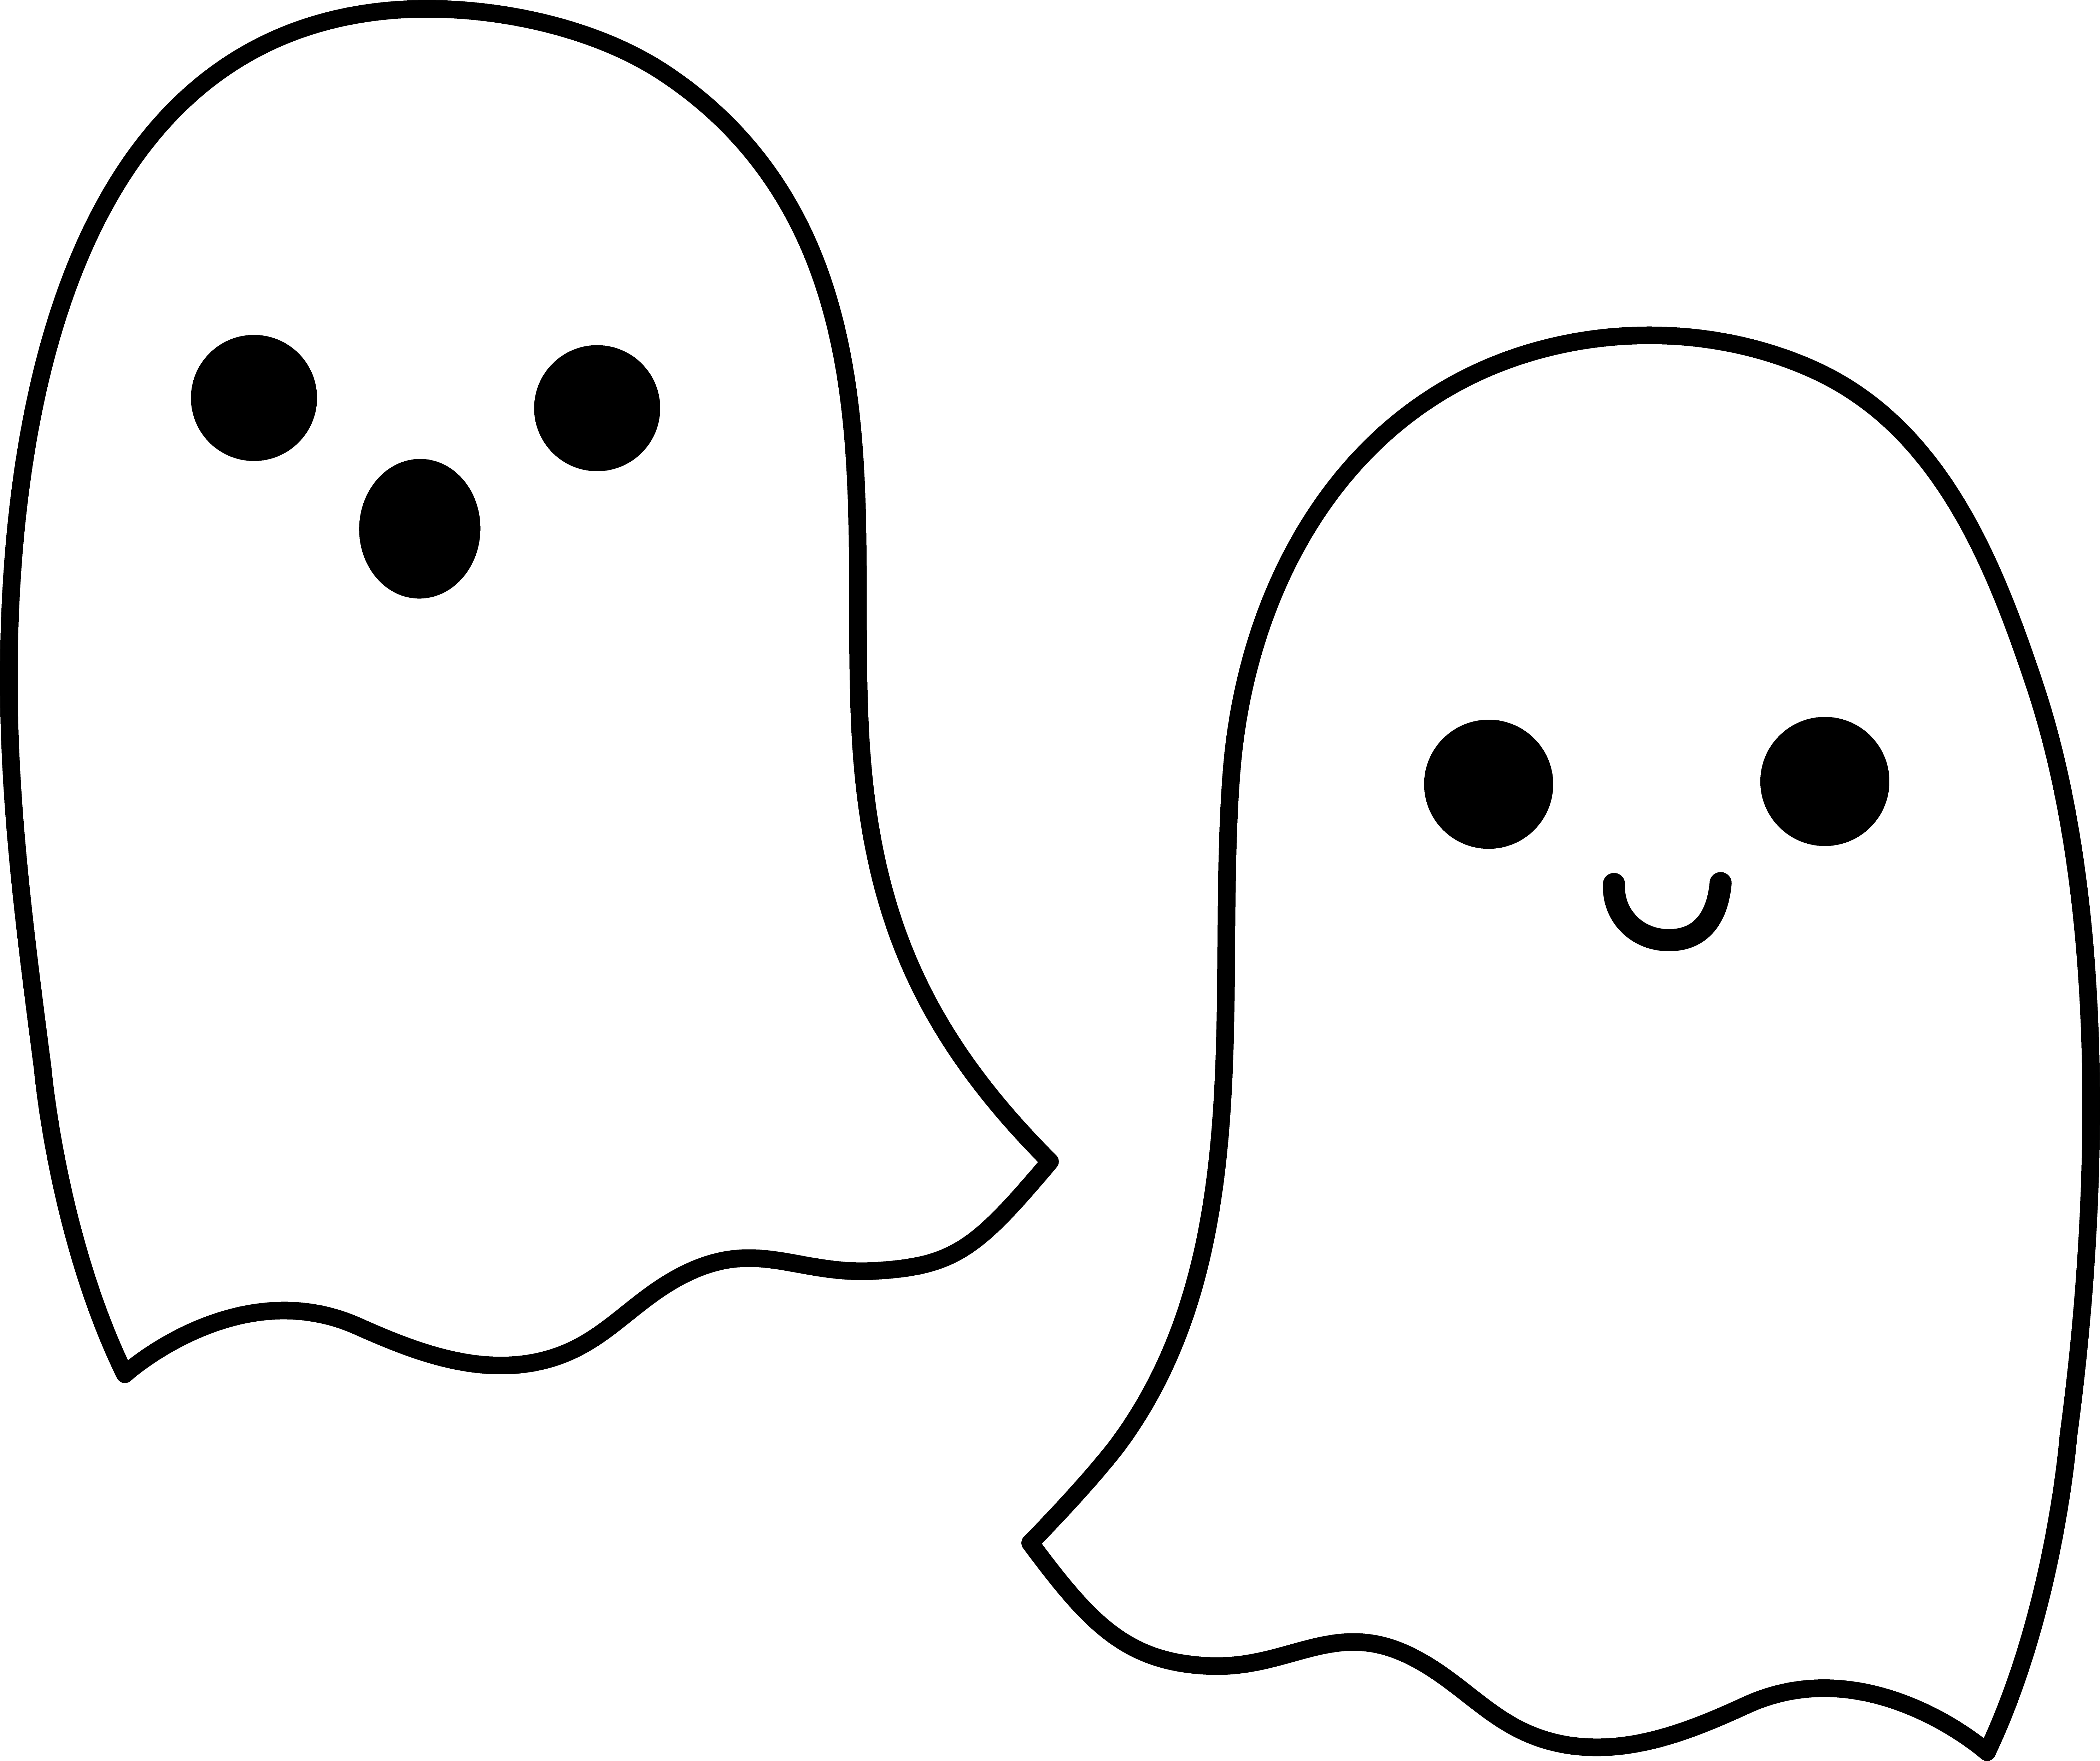 Halloween Ghost Border Clipart | Clipart Panda - Free Clipart Images